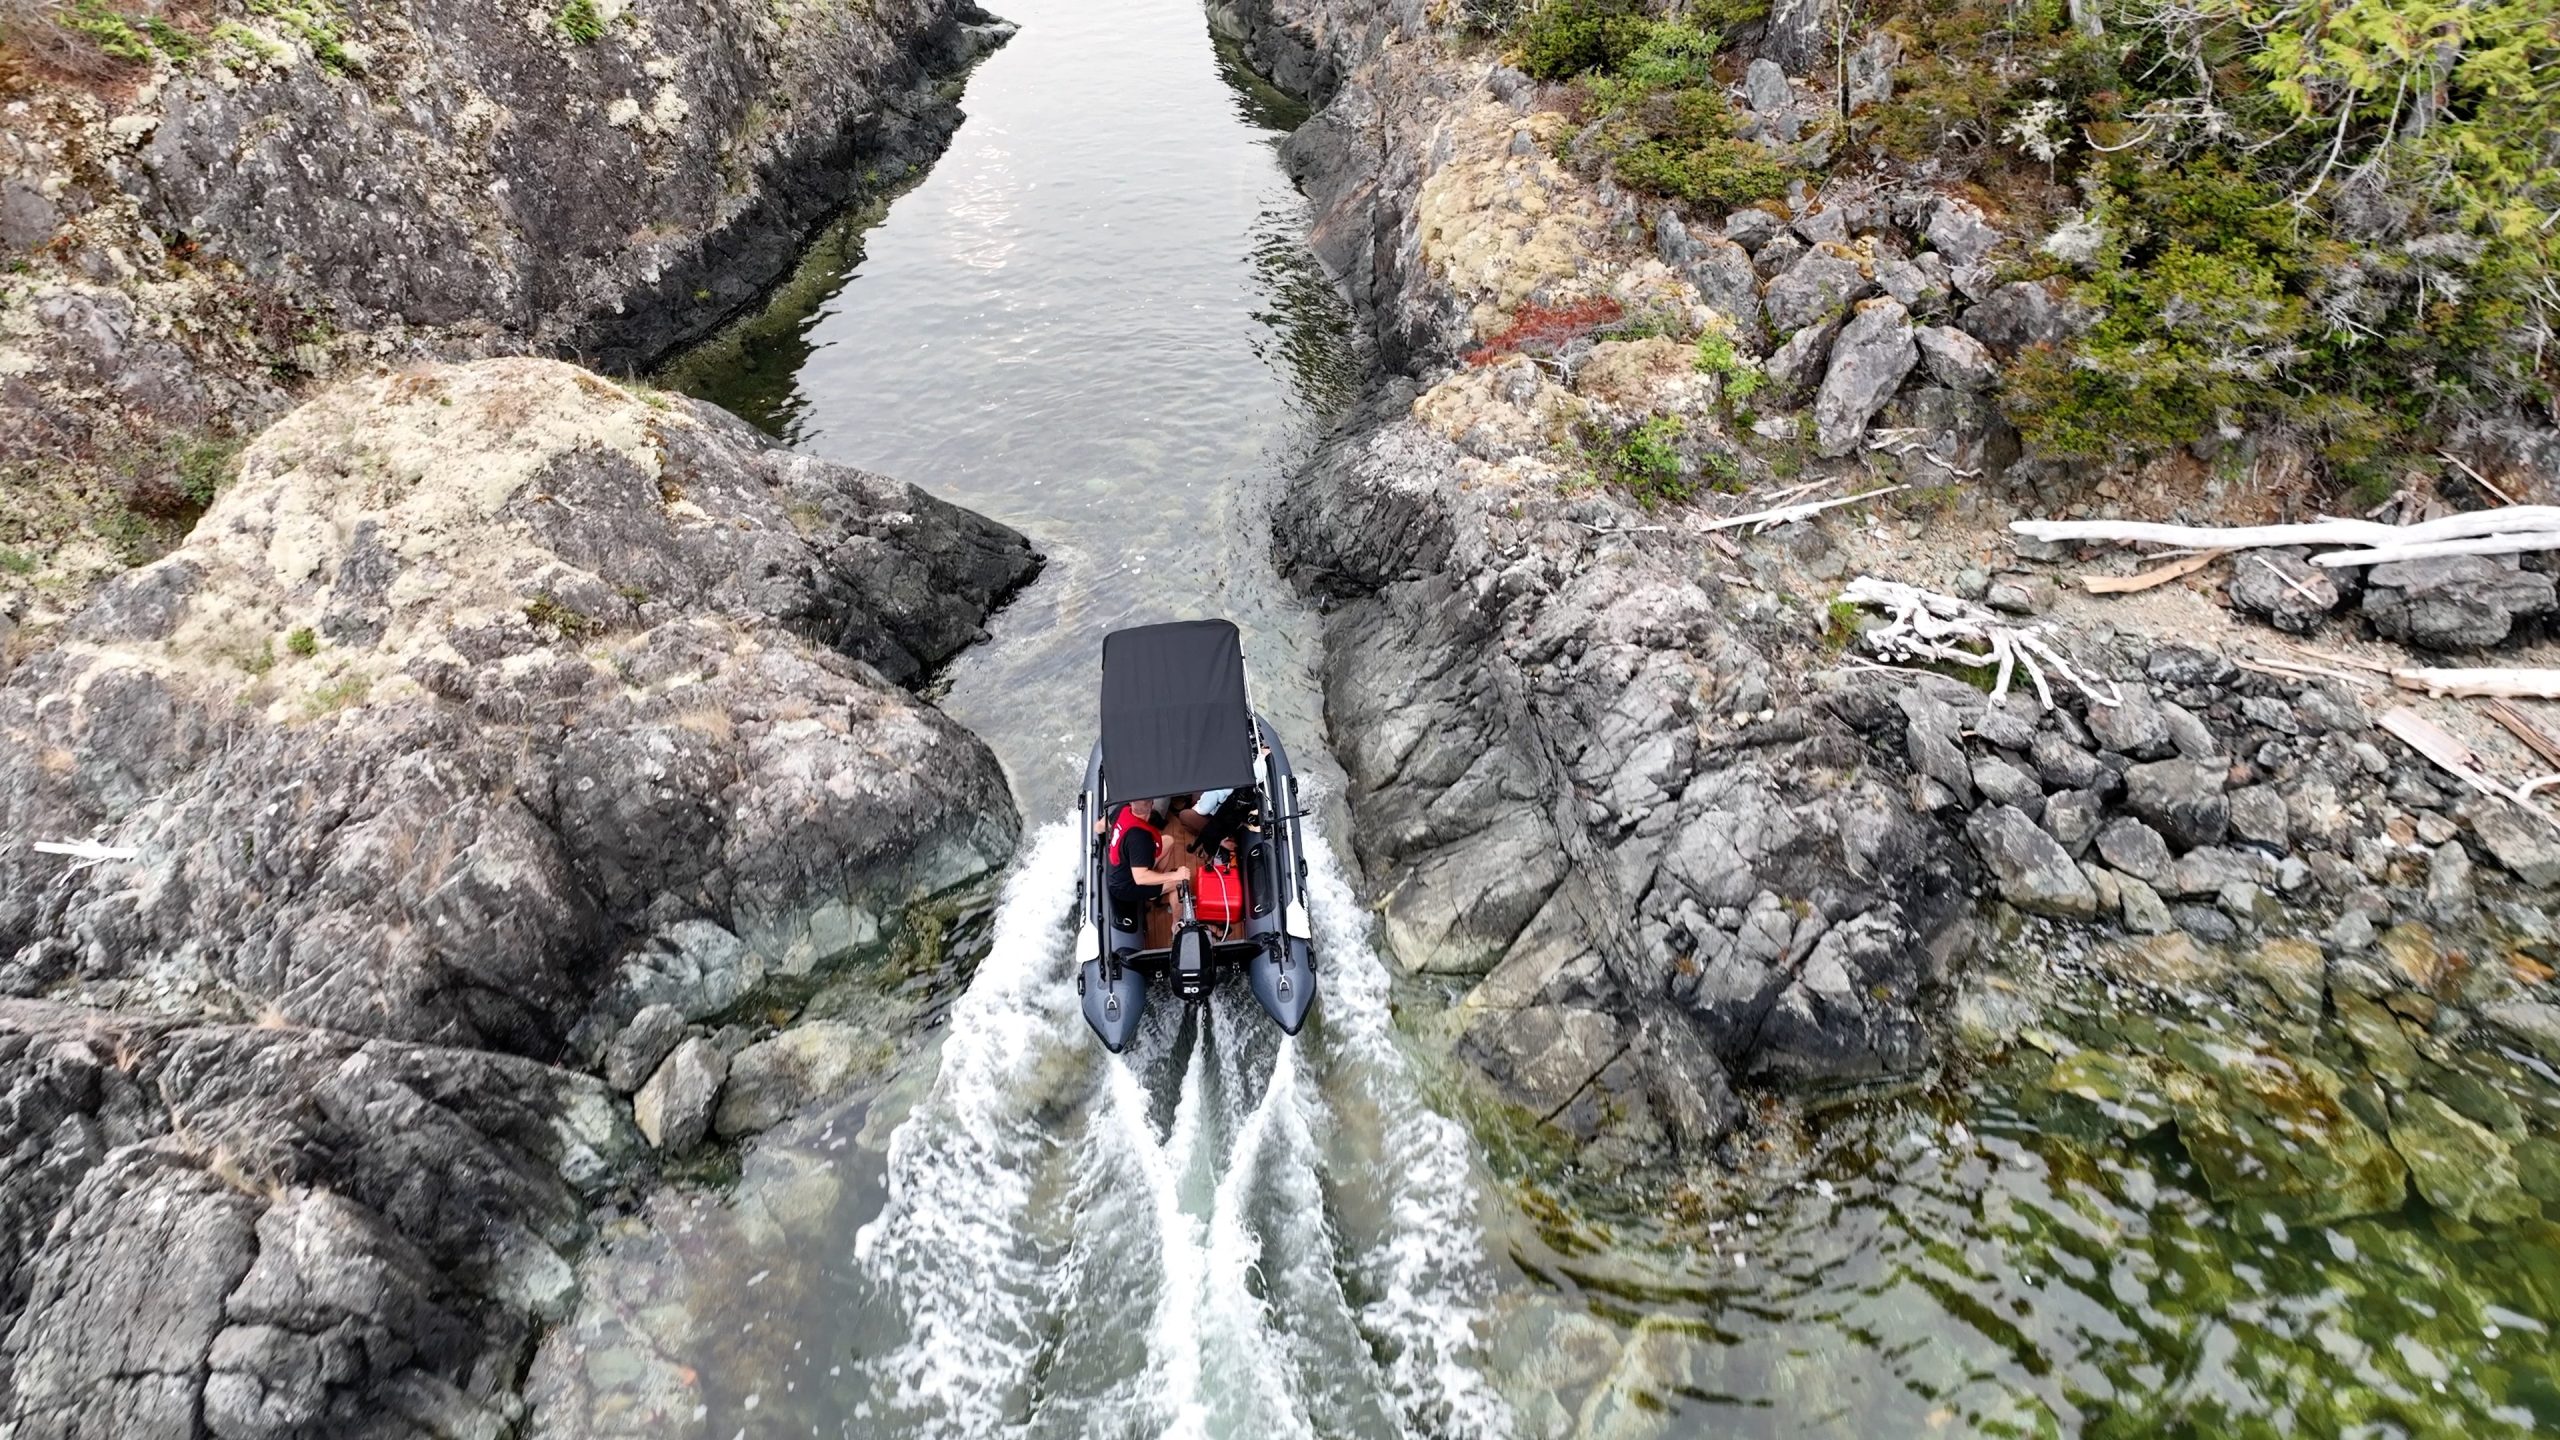 exploring the waters of British Columbia in an inflatable boat complete with bimini